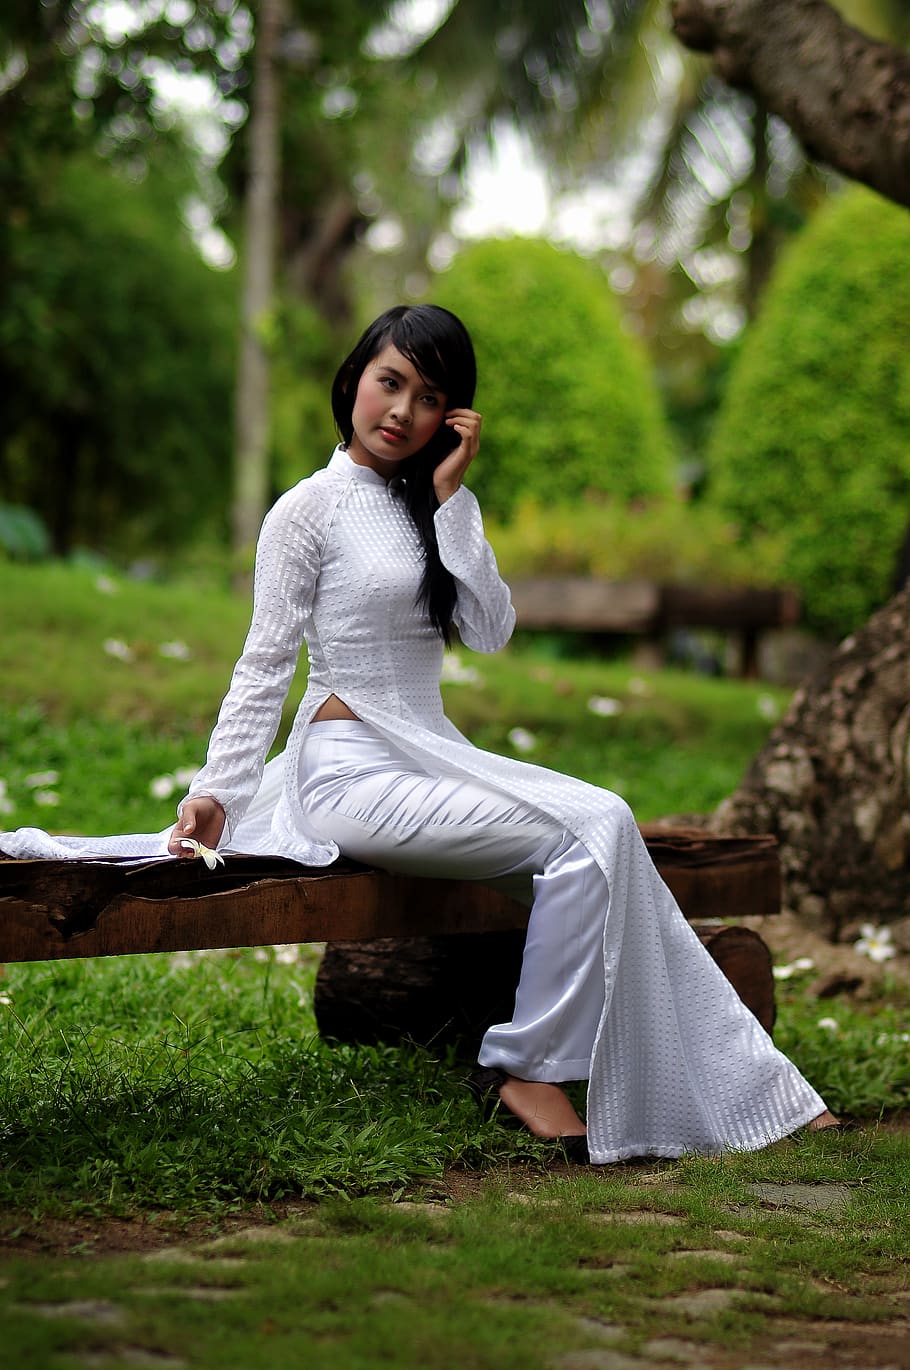 Woman Sitting on Bench Wearing White Long-sleeved Dress Selective Focus Photography